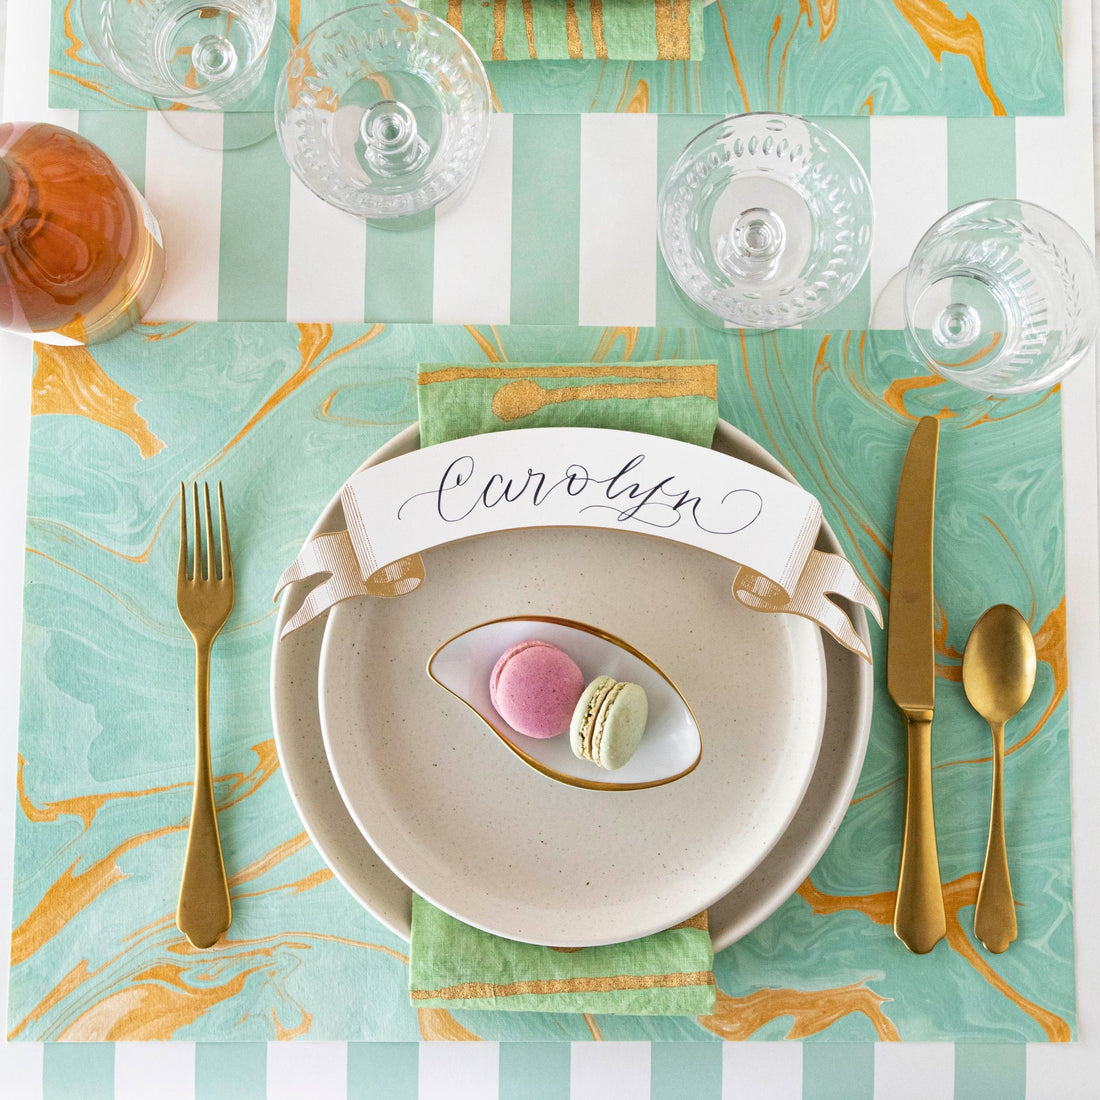 The Seafoam &amp; Gold Vein Marbled Placemat under an elegant table setting, from above.